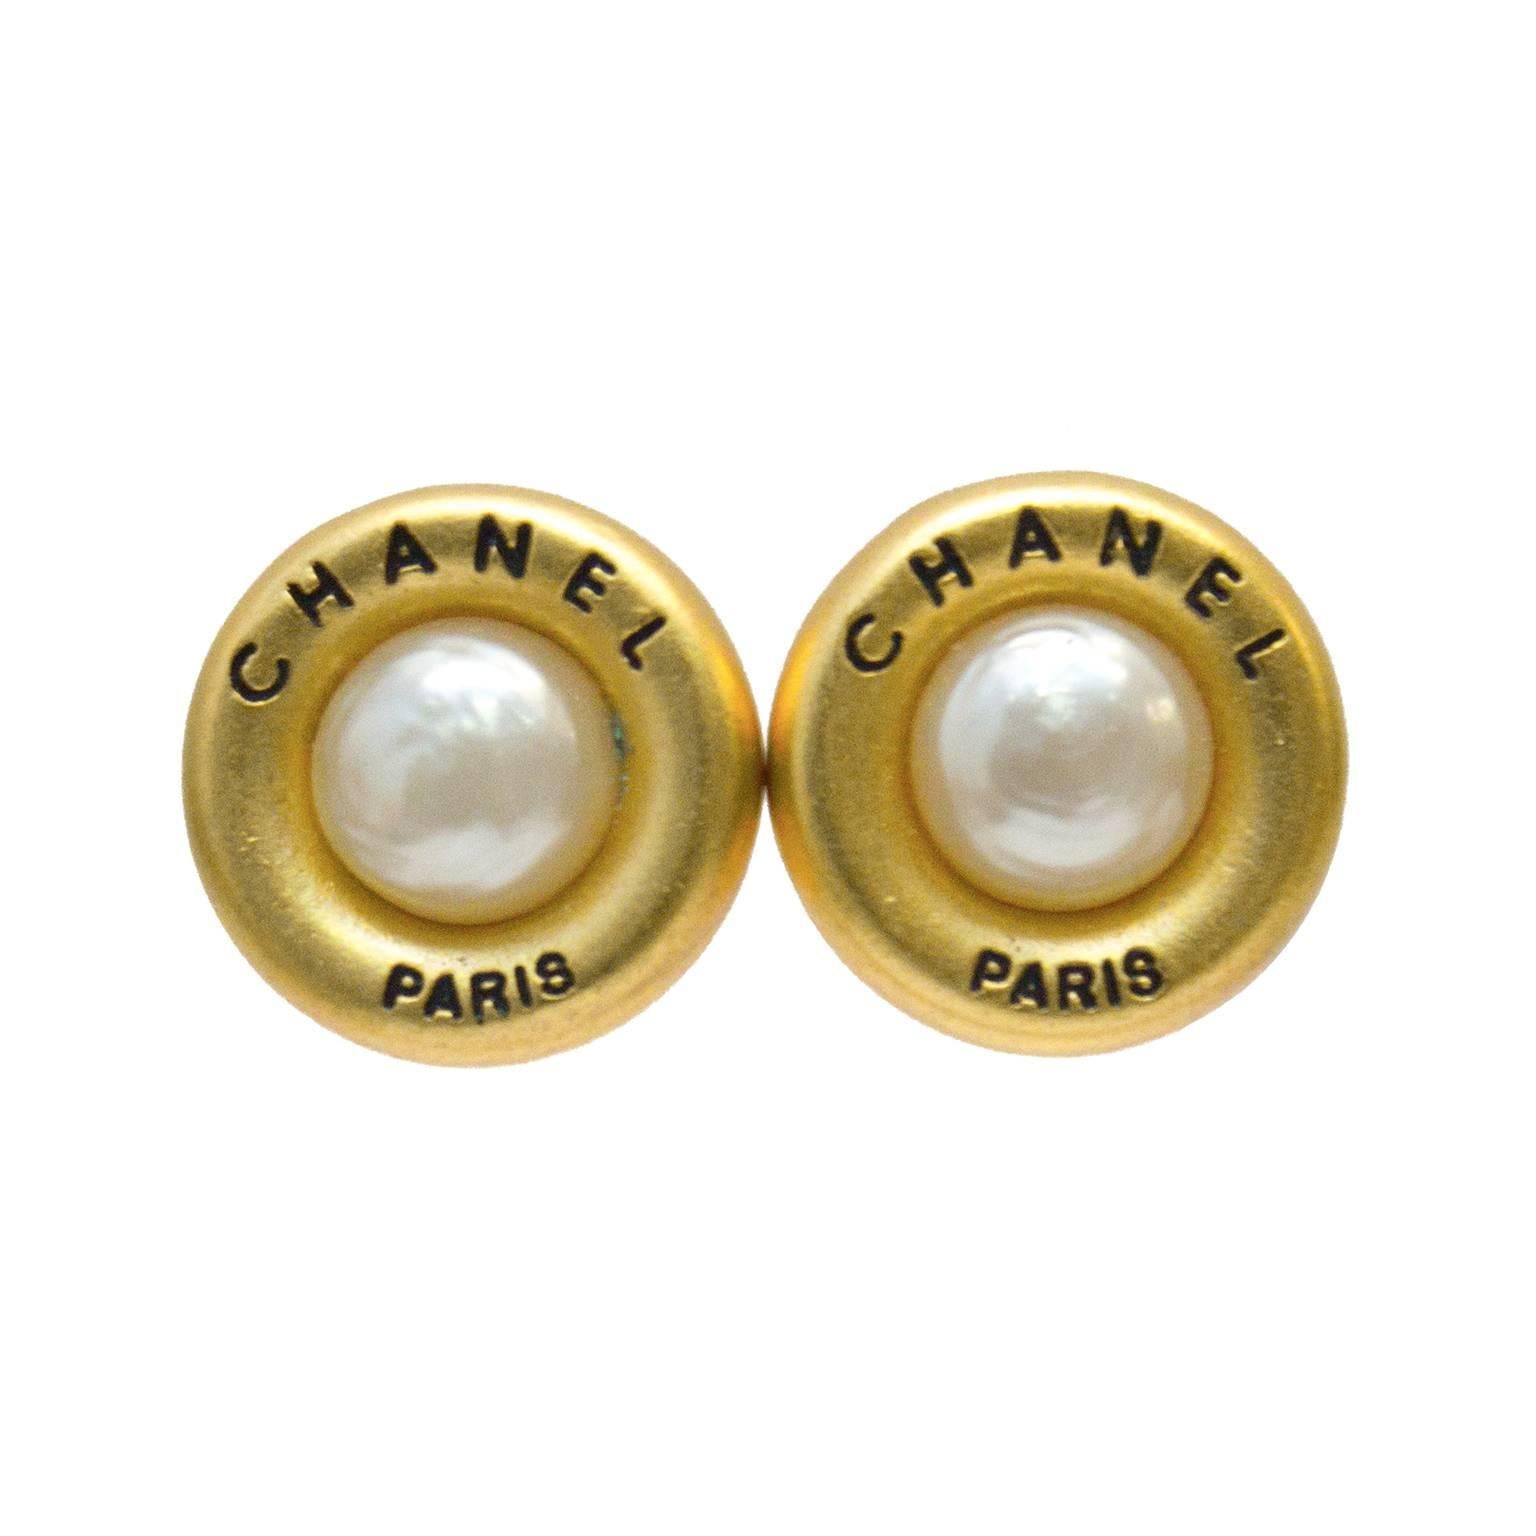 1993 Chanel Round Earrings with Pearl Center 